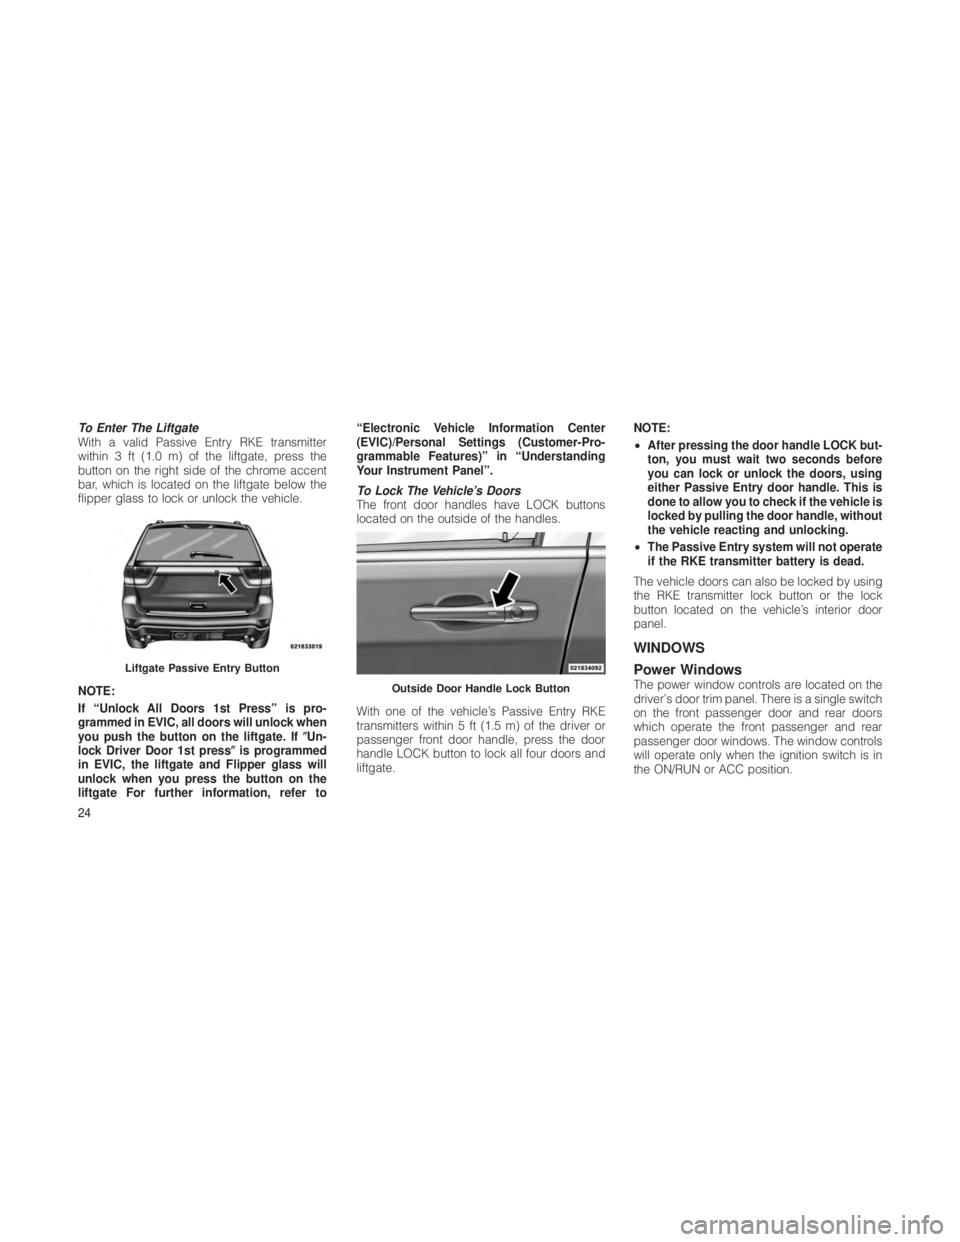 JEEP GRAND CHEROKEE 2012  Owner handbook (in English) To Enter The Liftgate
With a valid Passive Entry RKE transmitter
within 3 ft (1.0 m) of the liftgate, press the
button on the right side of the chrome accent
bar, which is located on the liftgate belo